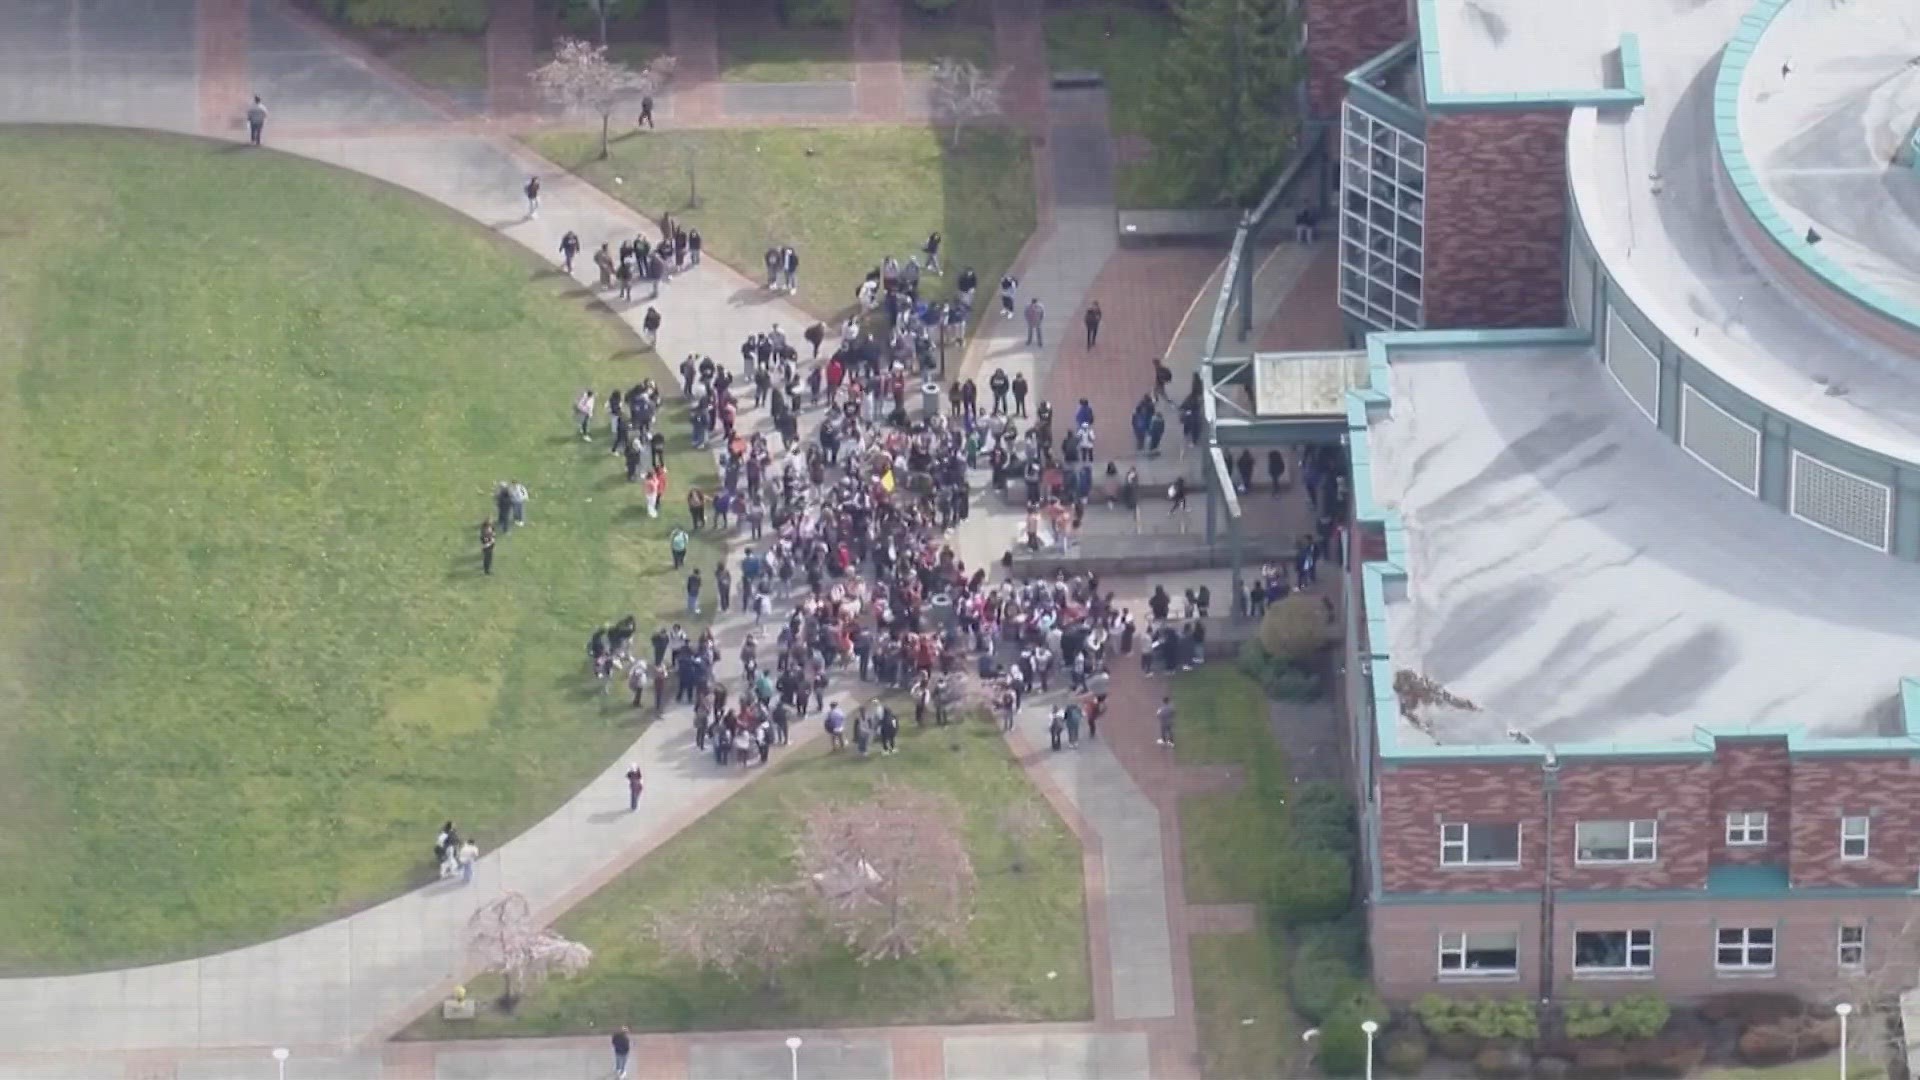 The nationwide walkout was planned by Students Demand Action.